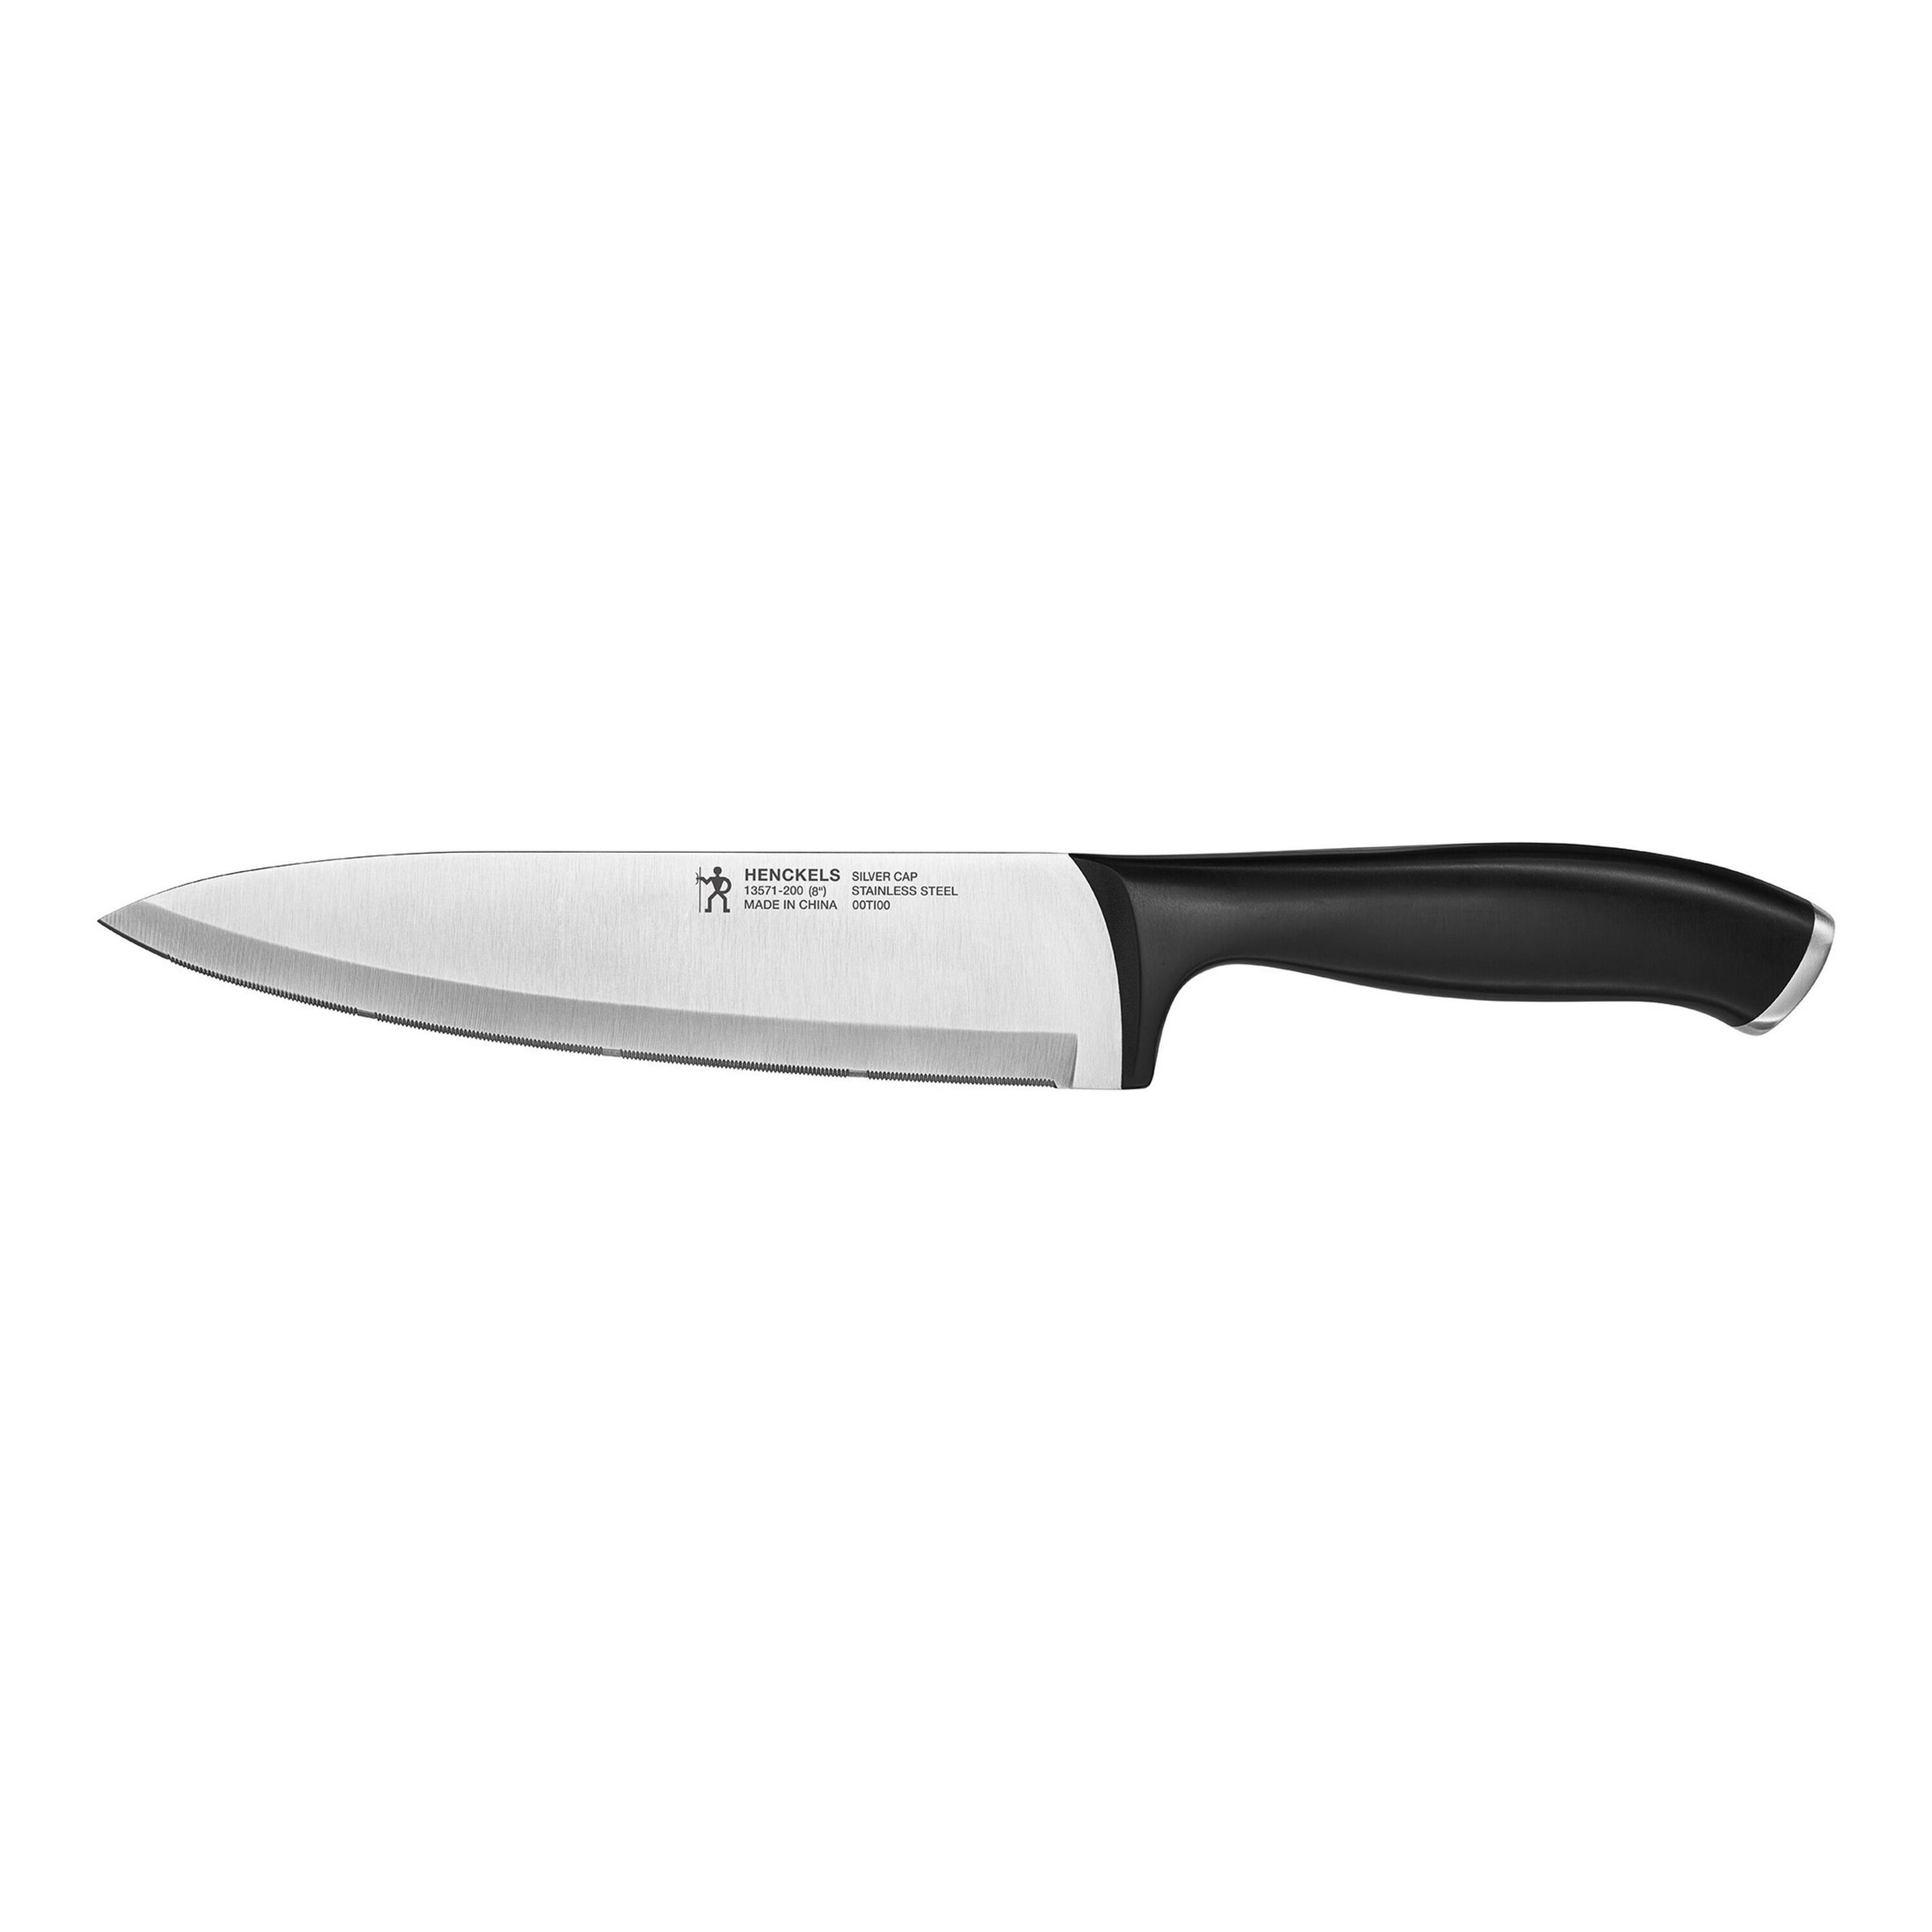 Choice 8 Serrated Chef Knife with White Handle